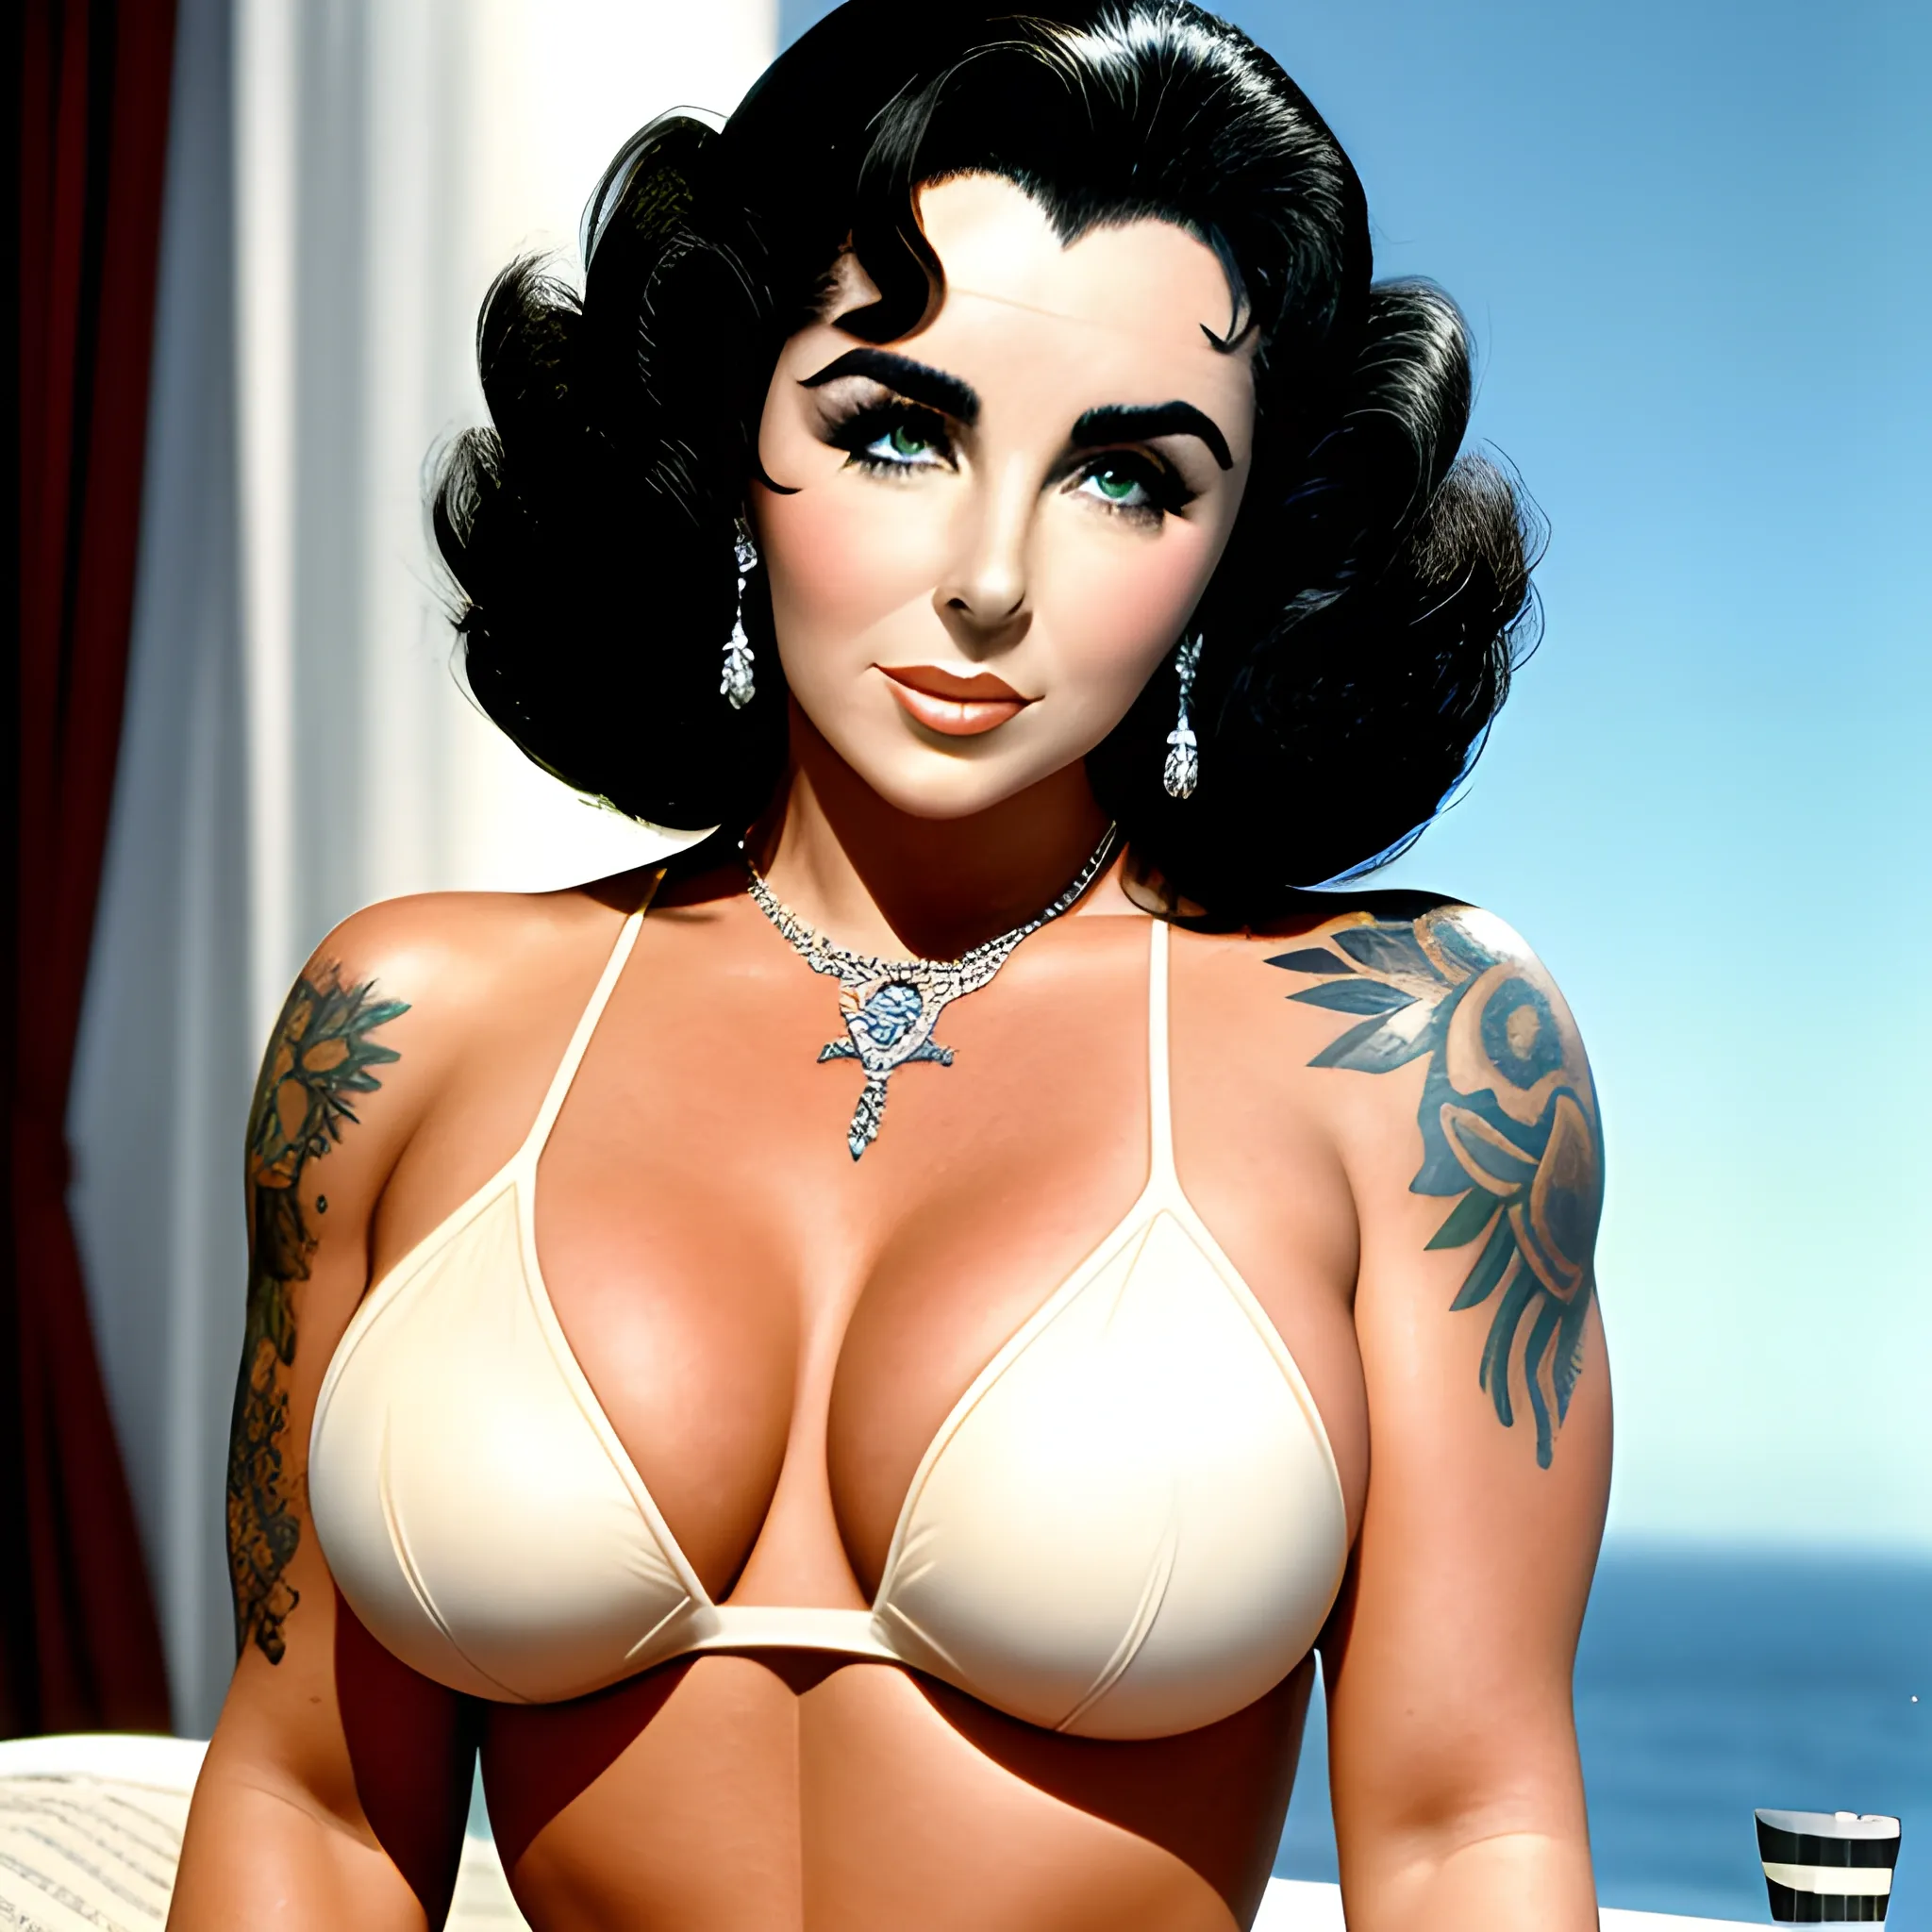 Elizabeth Taylor in the present time, in her youth, who has the style of today's girls and has an athletic body, tattoos on her body.